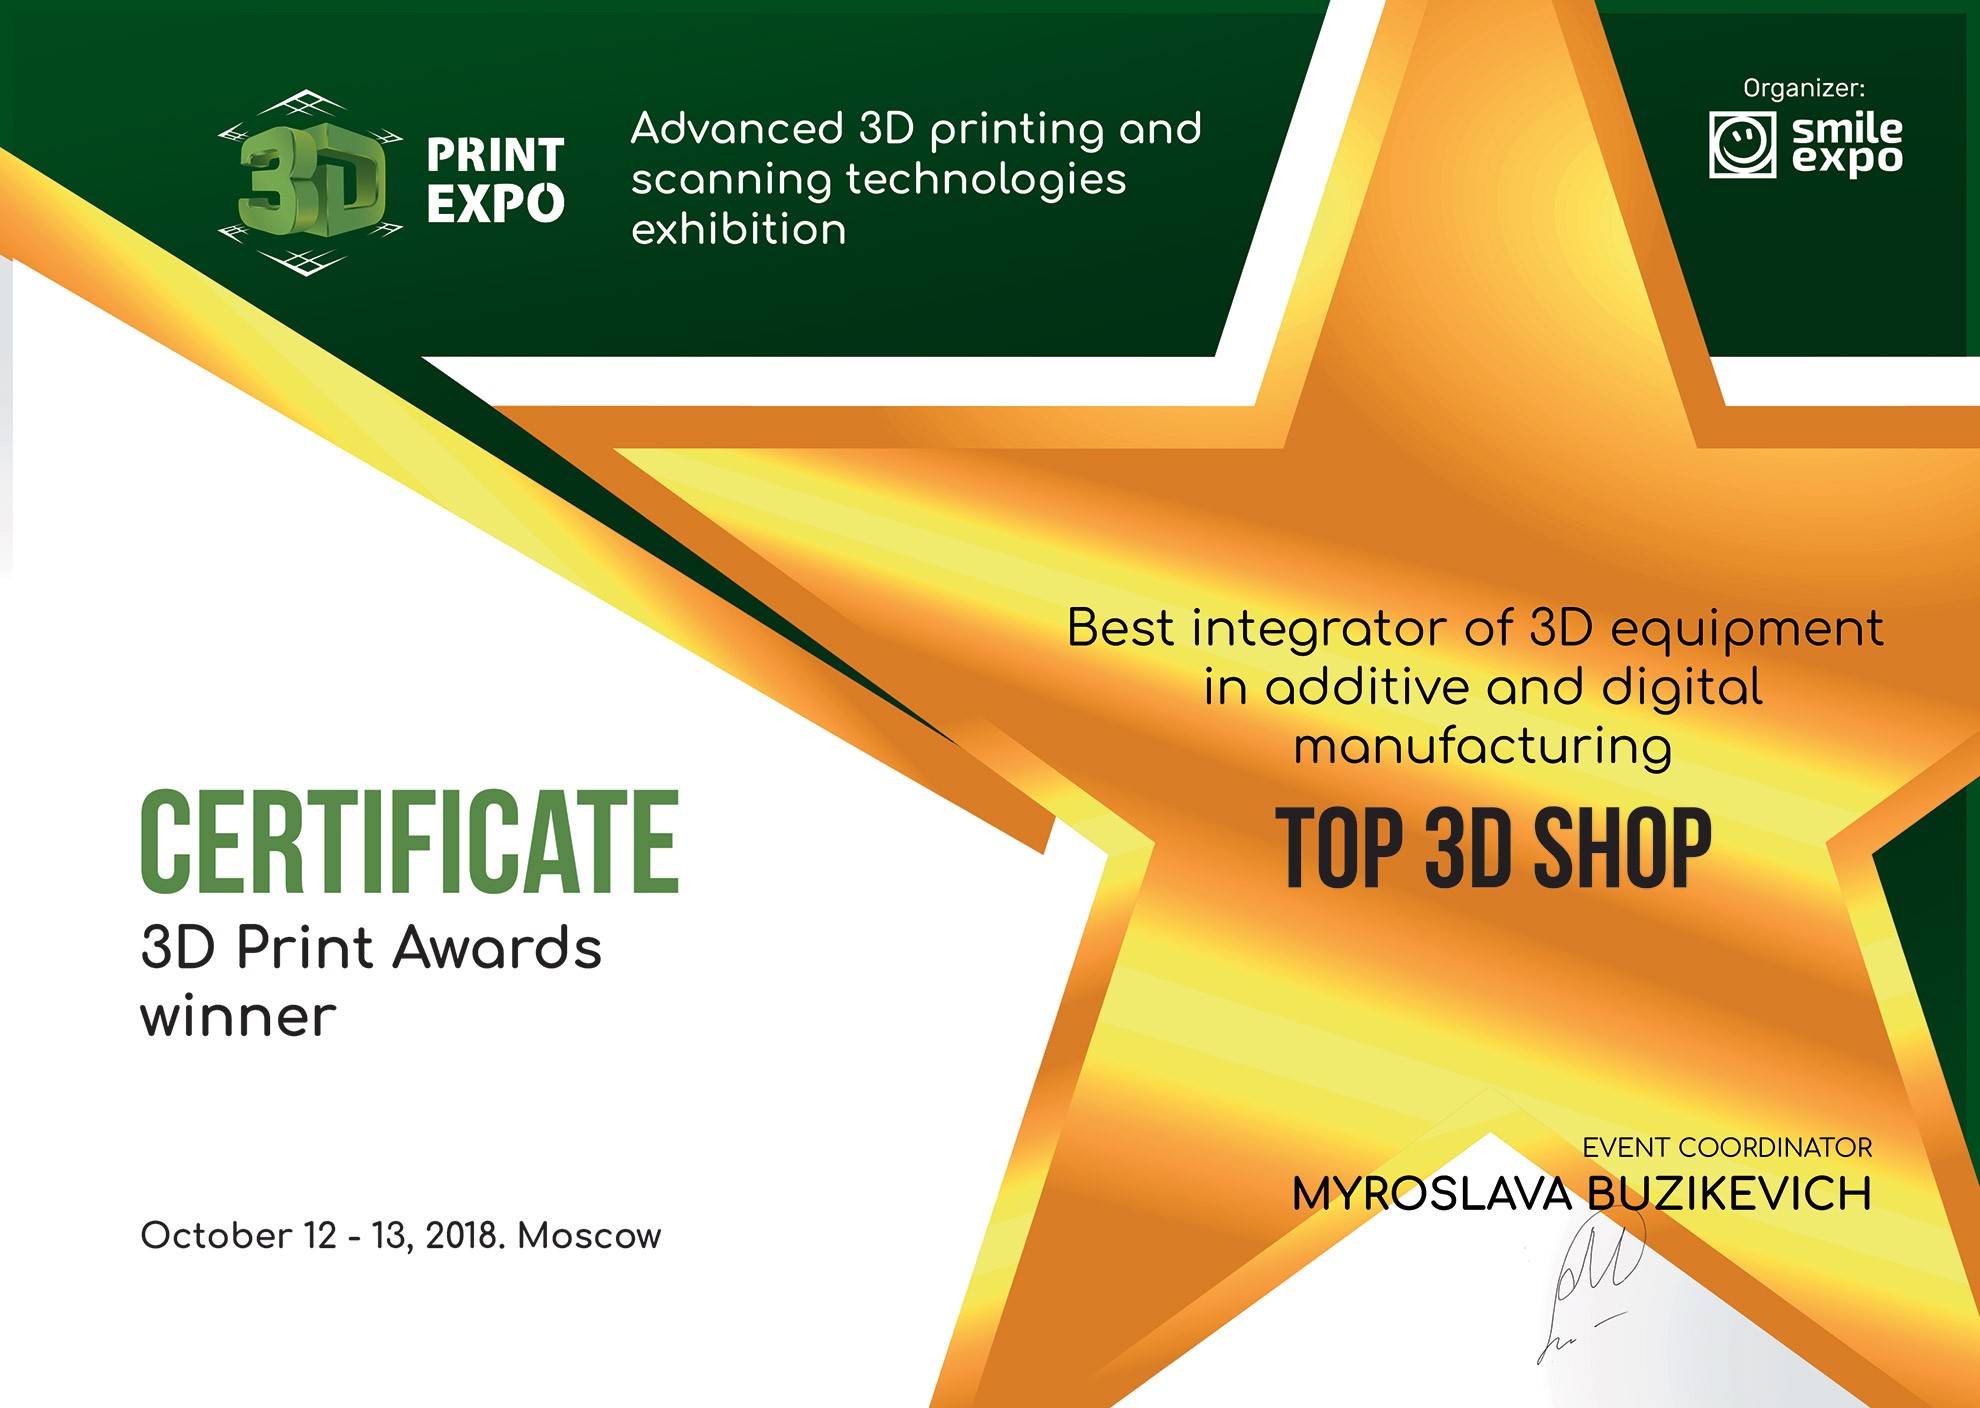 Digital Manufacturing Integrator and Store Top 3D Shop. 3D 3D Scanners, CNC Machines, Robots and Custom solutions